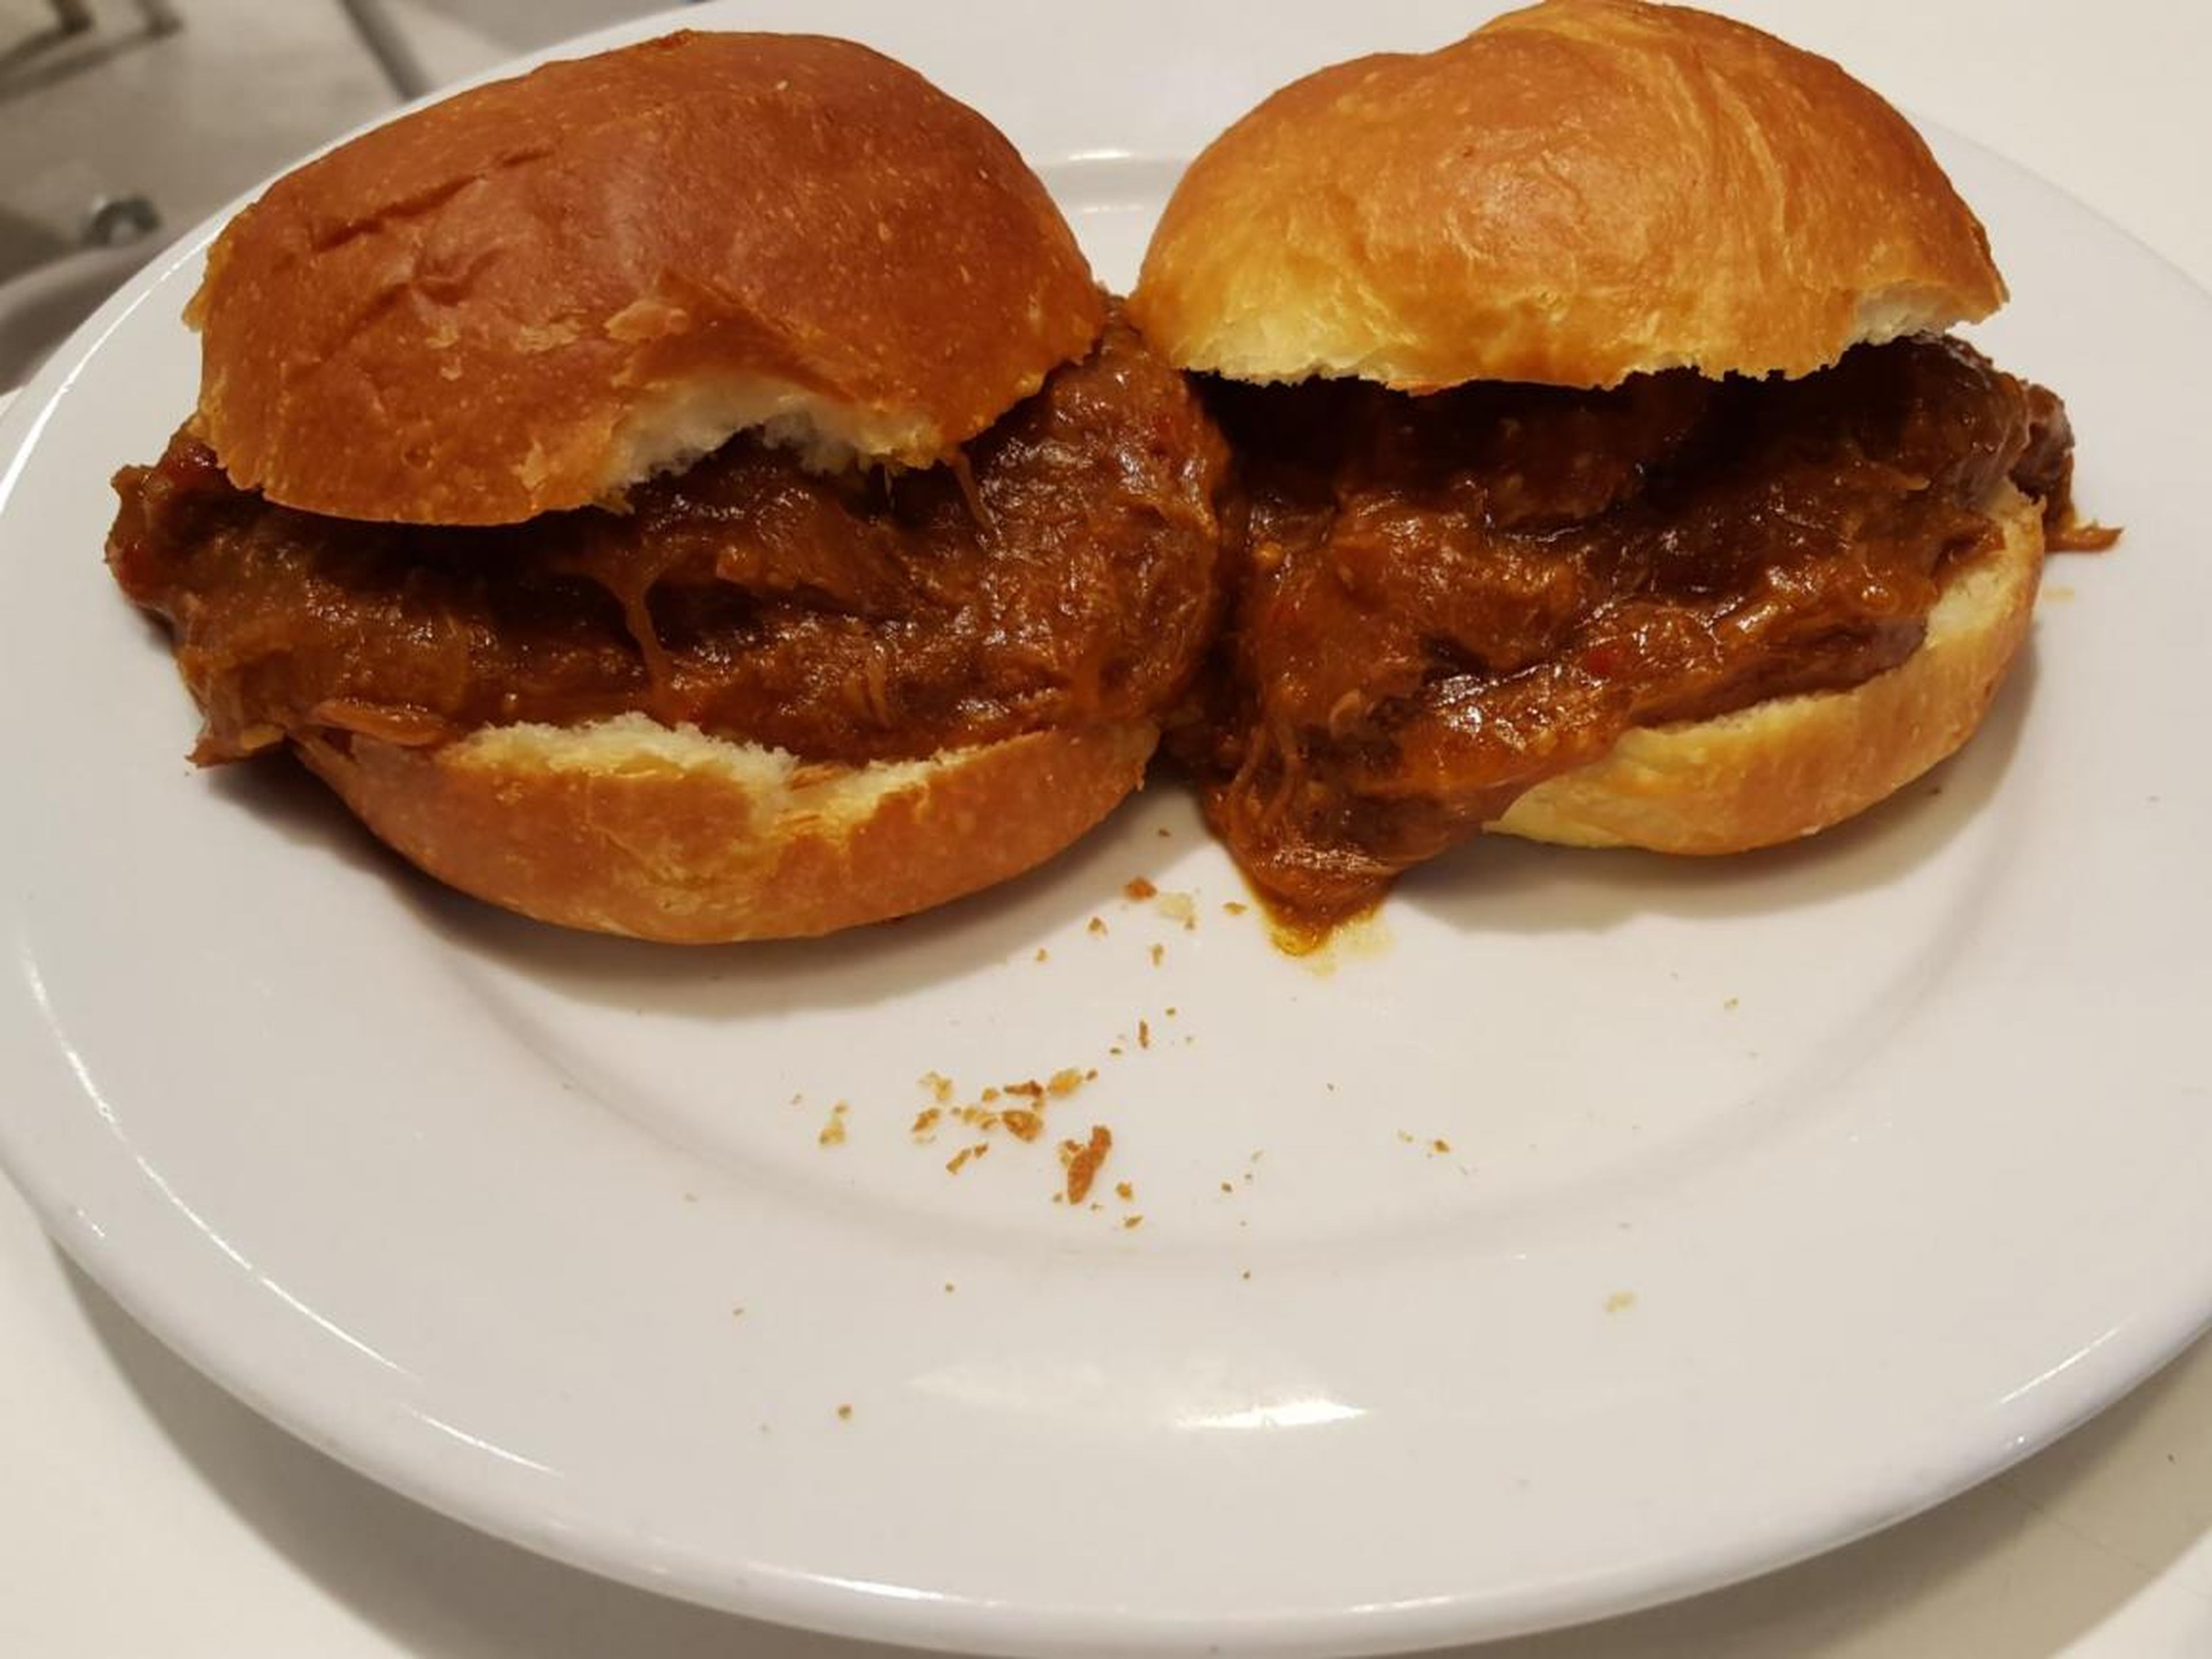 Australian shoppers have the option to order sandwiches. This is slow-cooked pork on a bun.